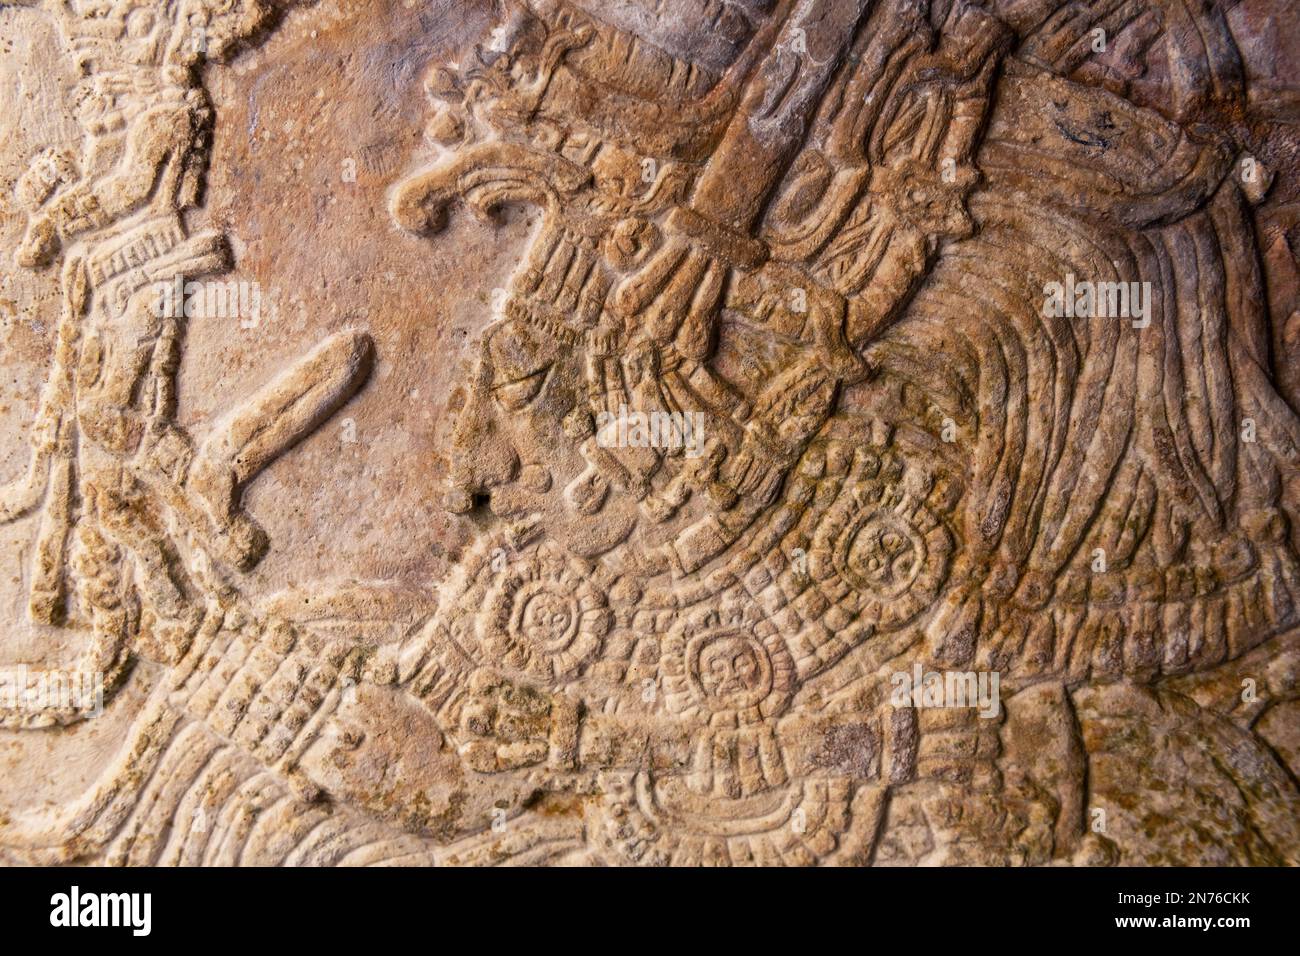 Bas relief carving of mayan ruler king in tombstone, Mexico City, Mexico. Stock Photo